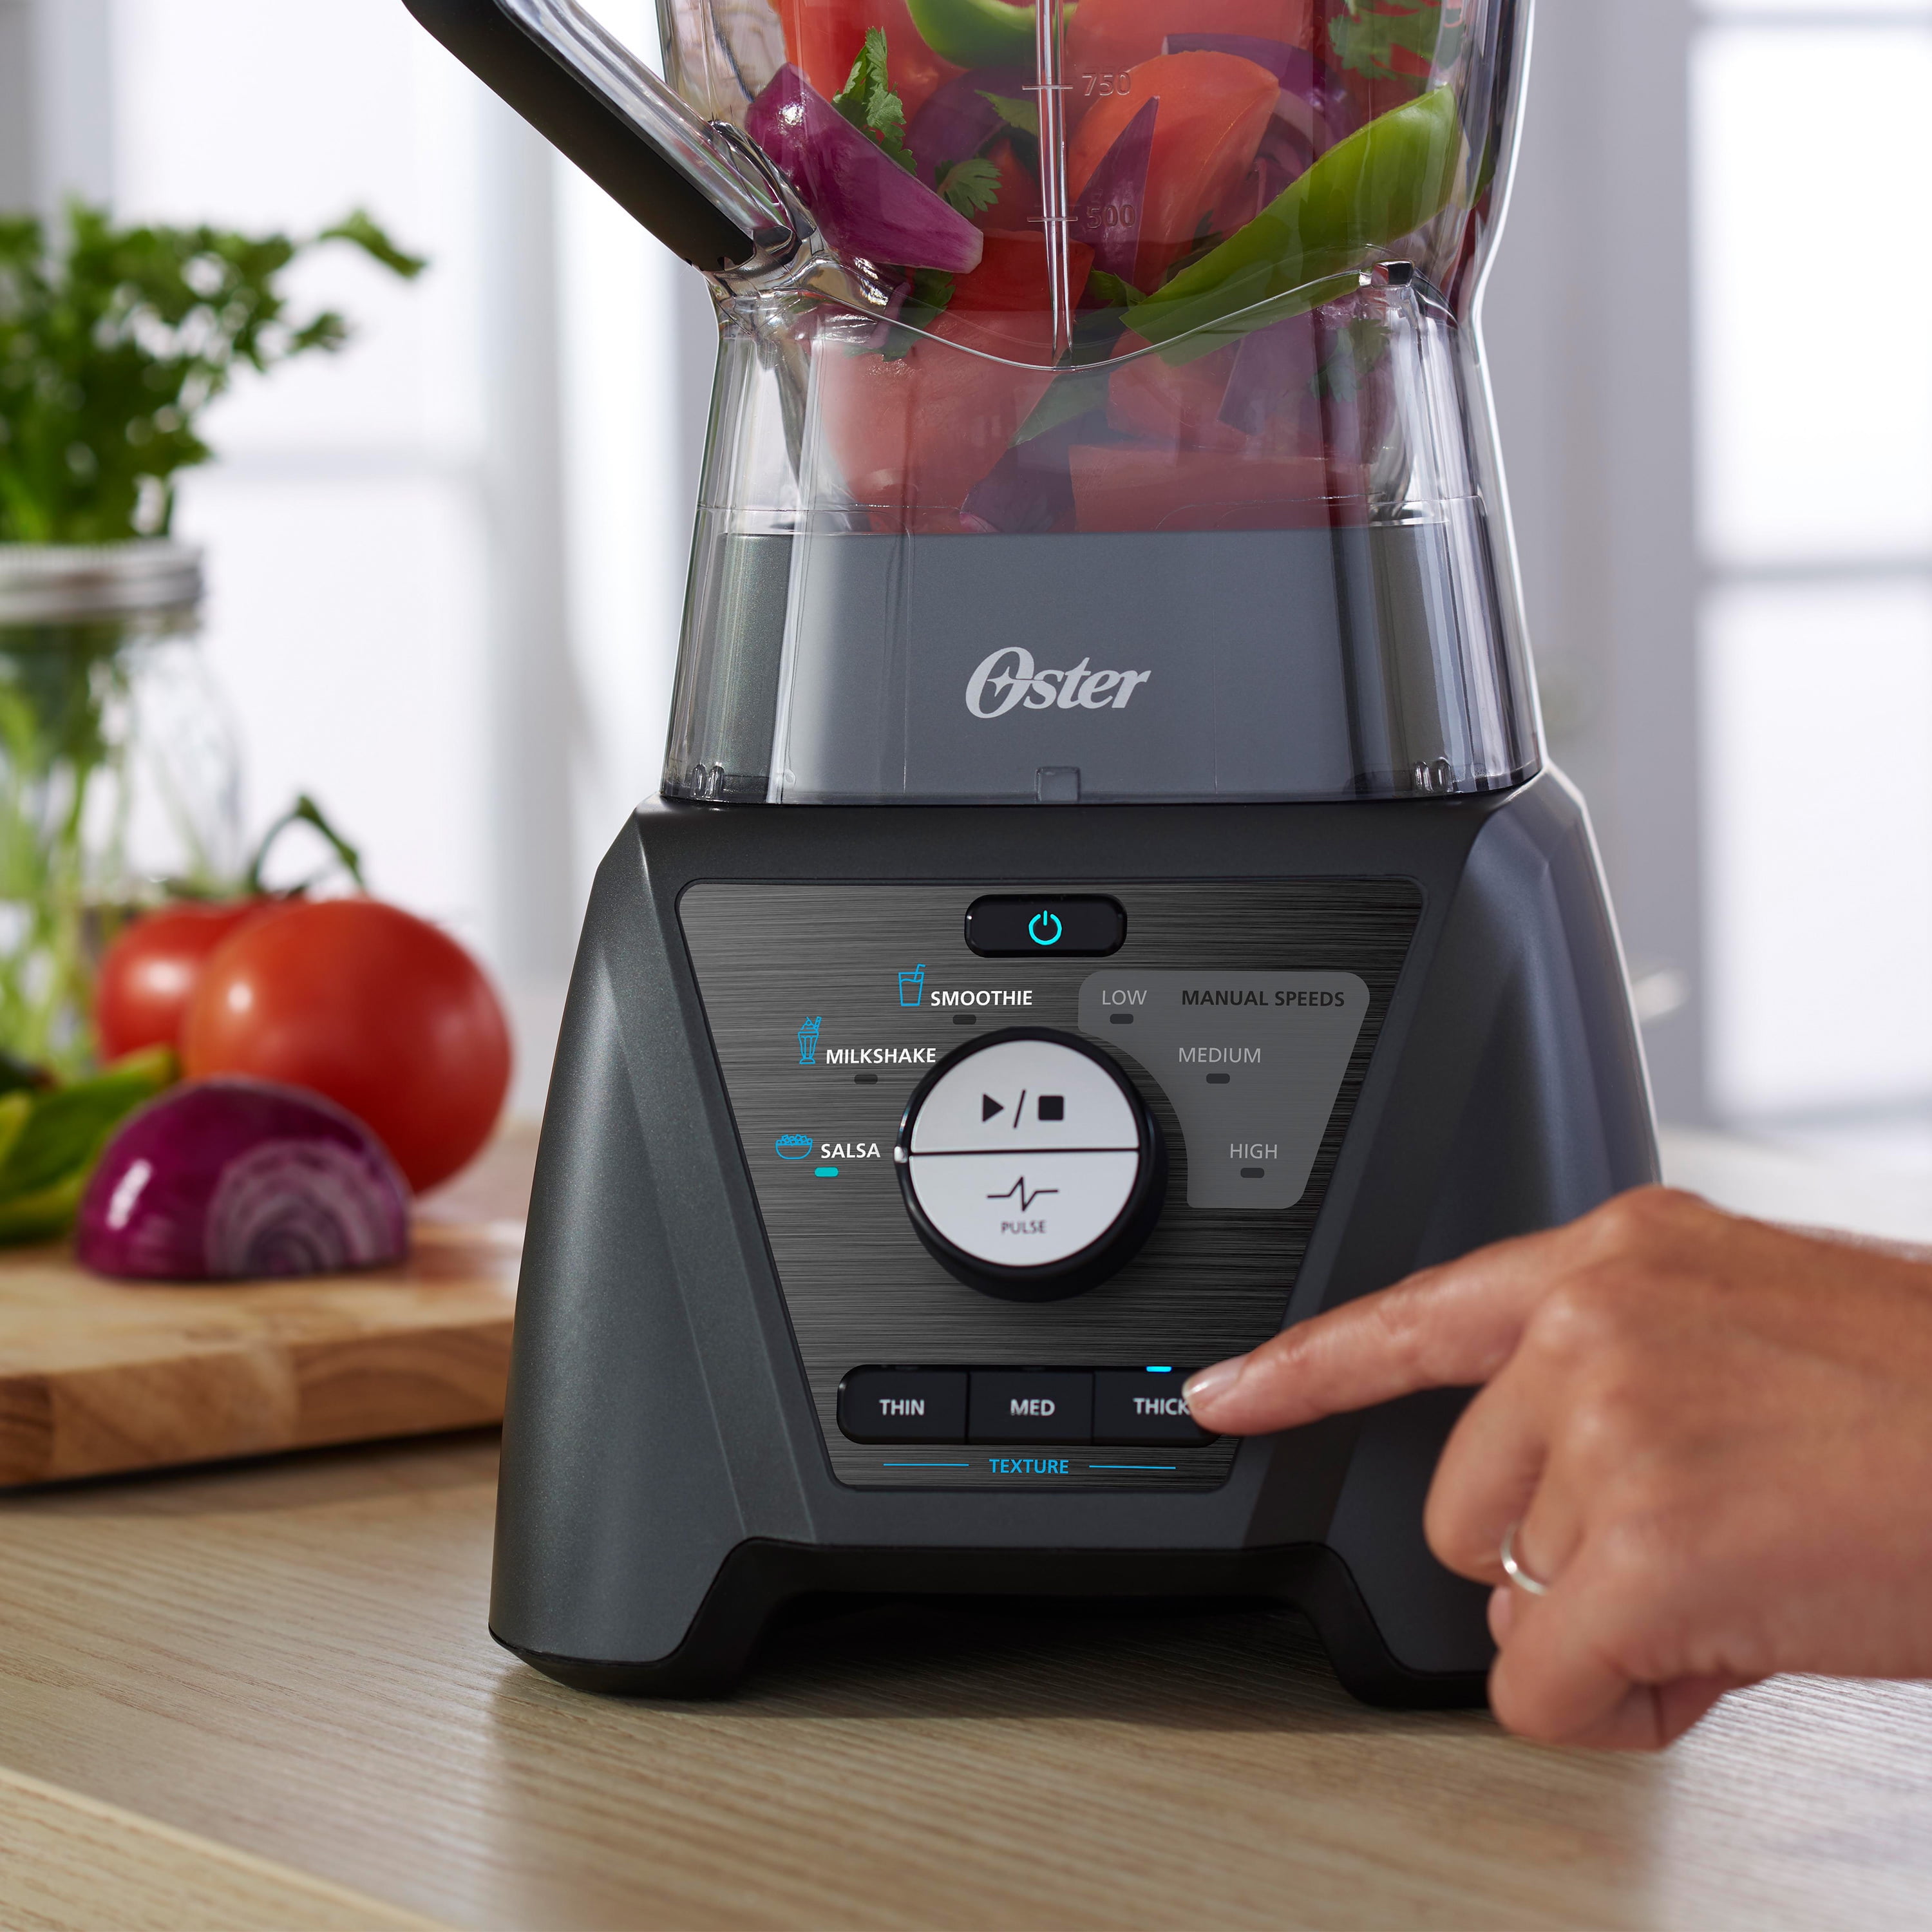 Oster 2198585 Pro Series Kitchen System XL Blender and Food